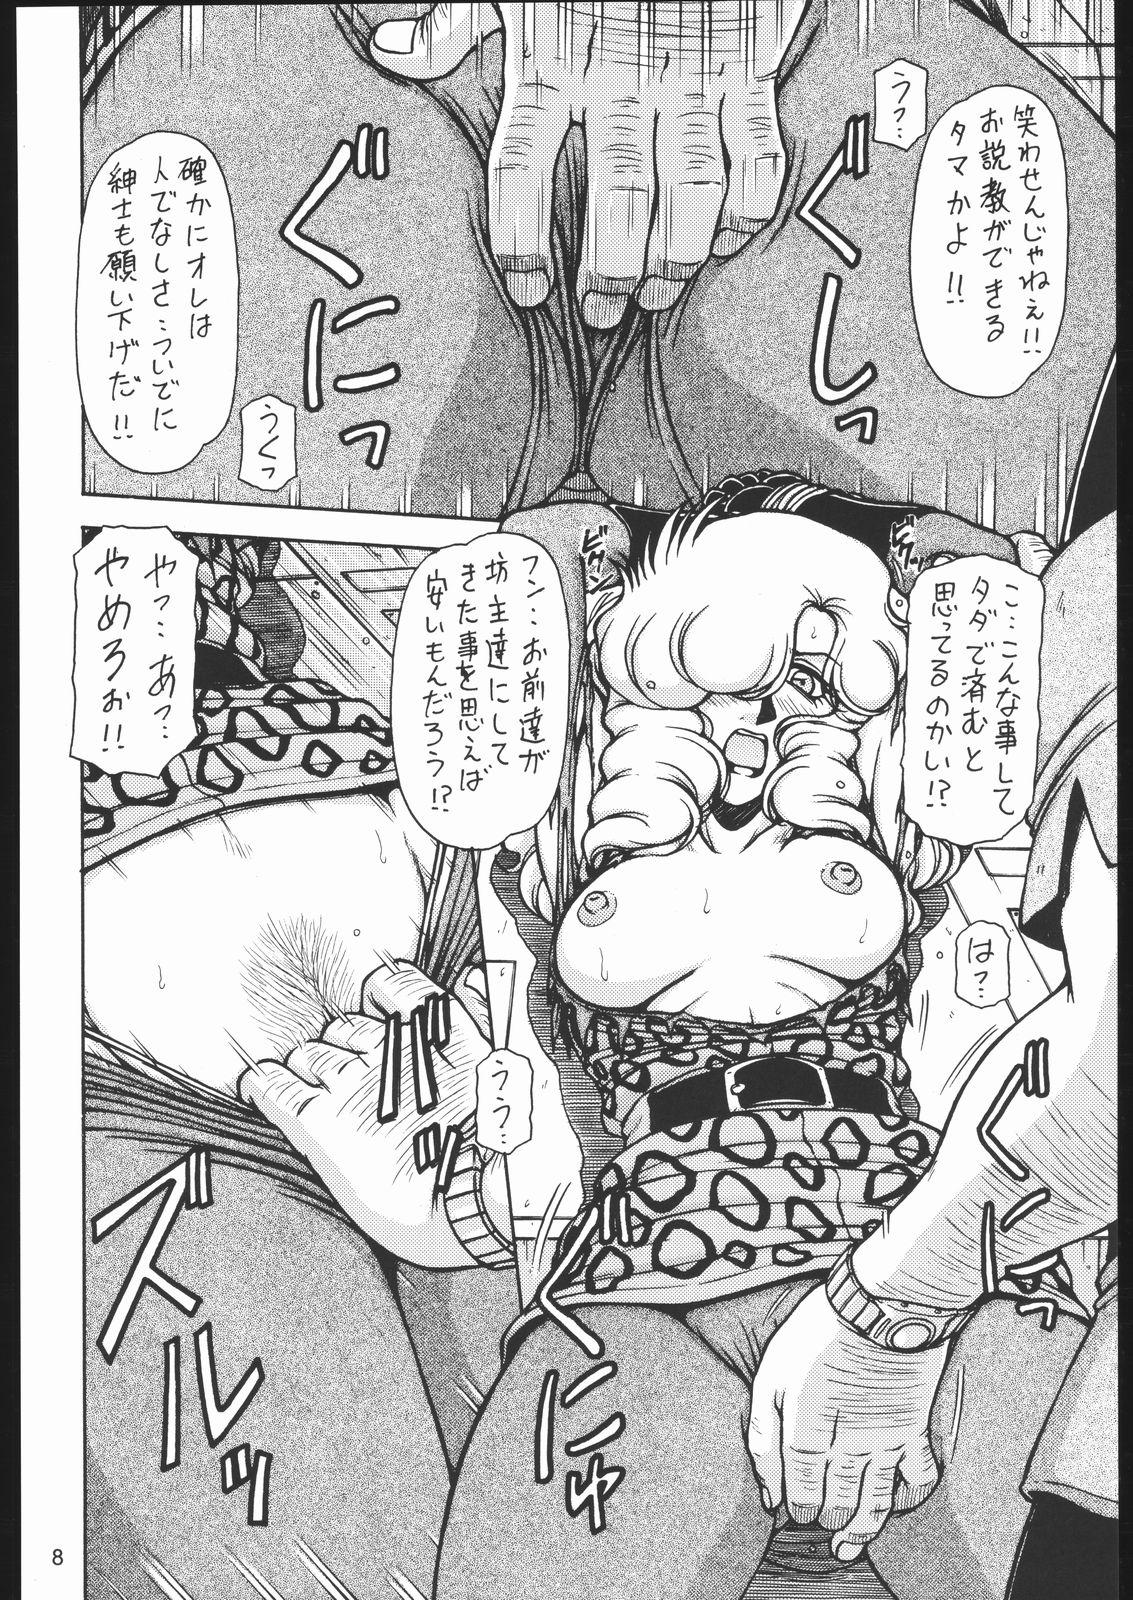 Movies Red Muffler GG - Giant gorg She - Page 7